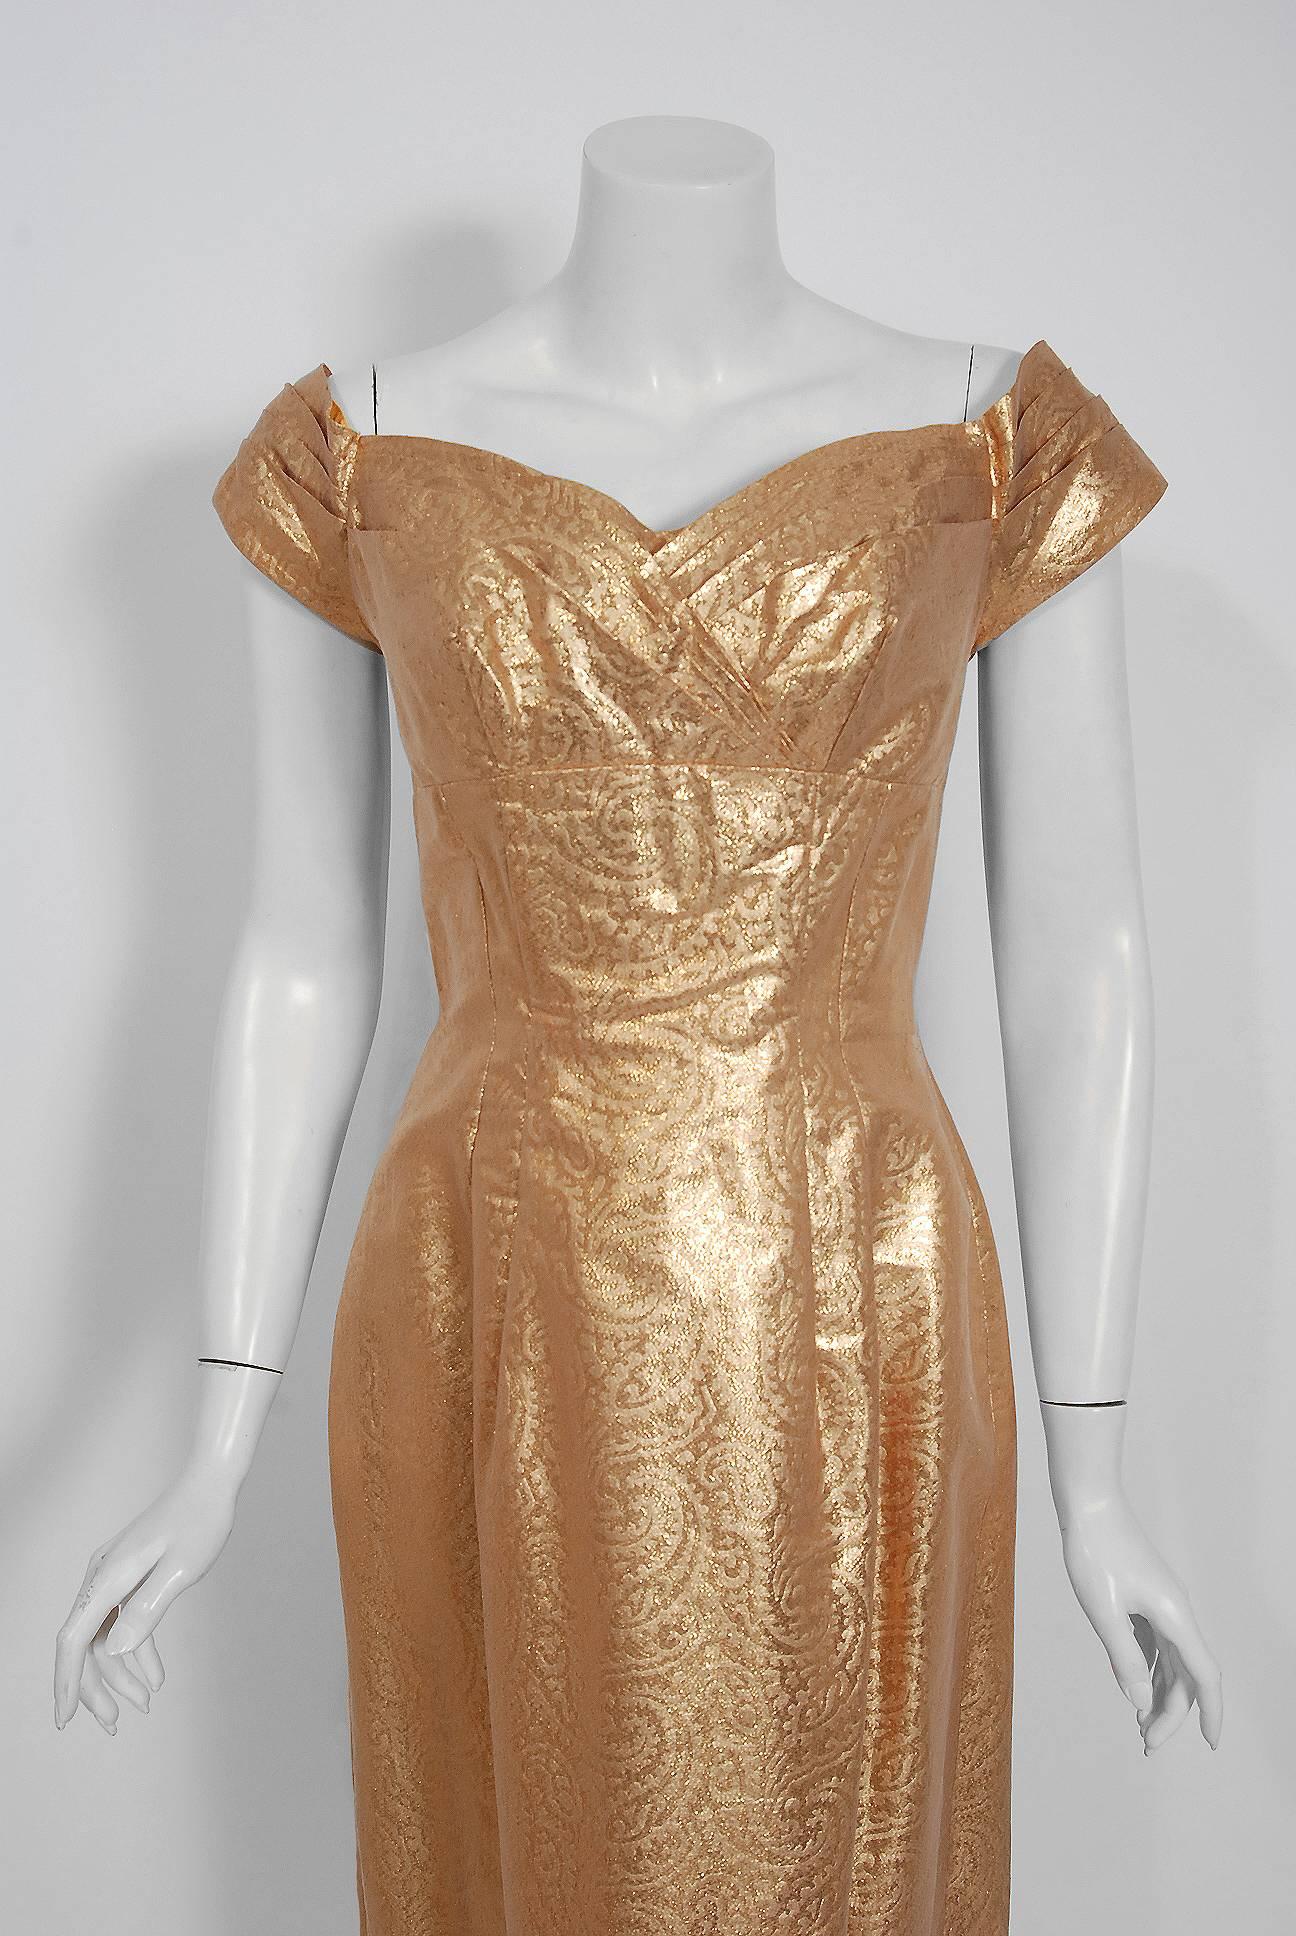 A stunning 1950's custom couture metallic-gold bombshell cocktail from the Old Hollywood era of glamour! The fabric itself is a masterpiece; shimmering paisley floral print golden lined silk lamé. The bodice is an alluring low-cut plunge pleated